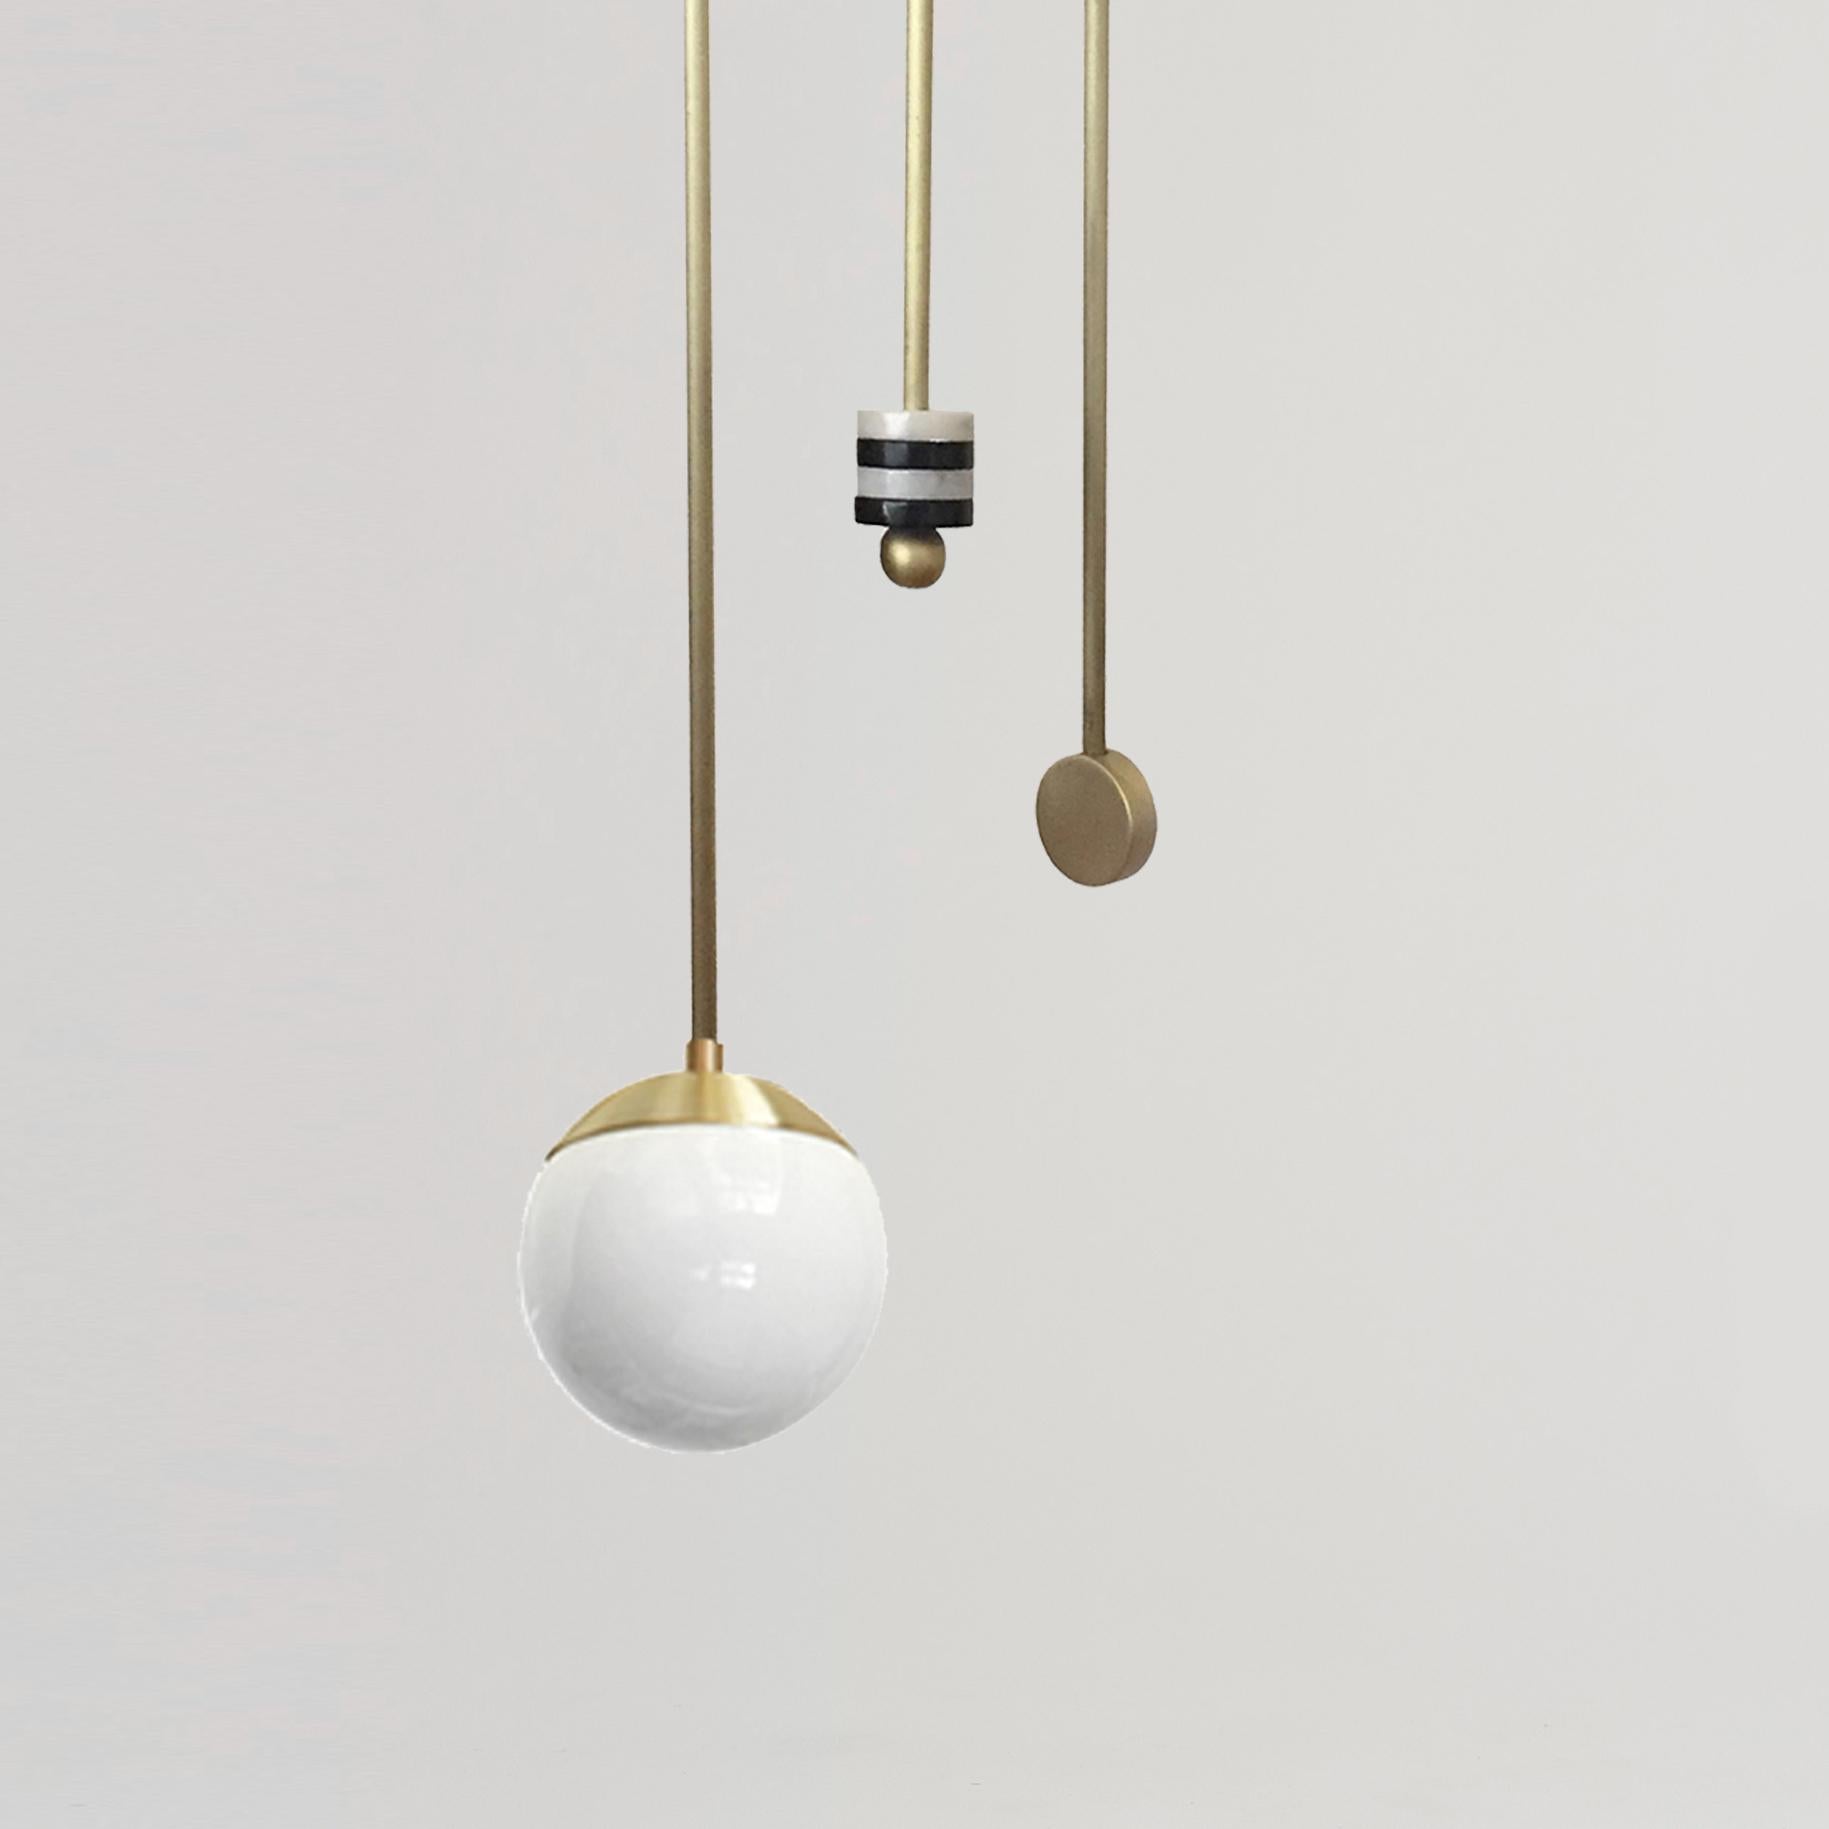 Mexican FLOW VERTICAL PENDANT LAMP, Contemporary, Sculptural Lighting by Rebeca Cors